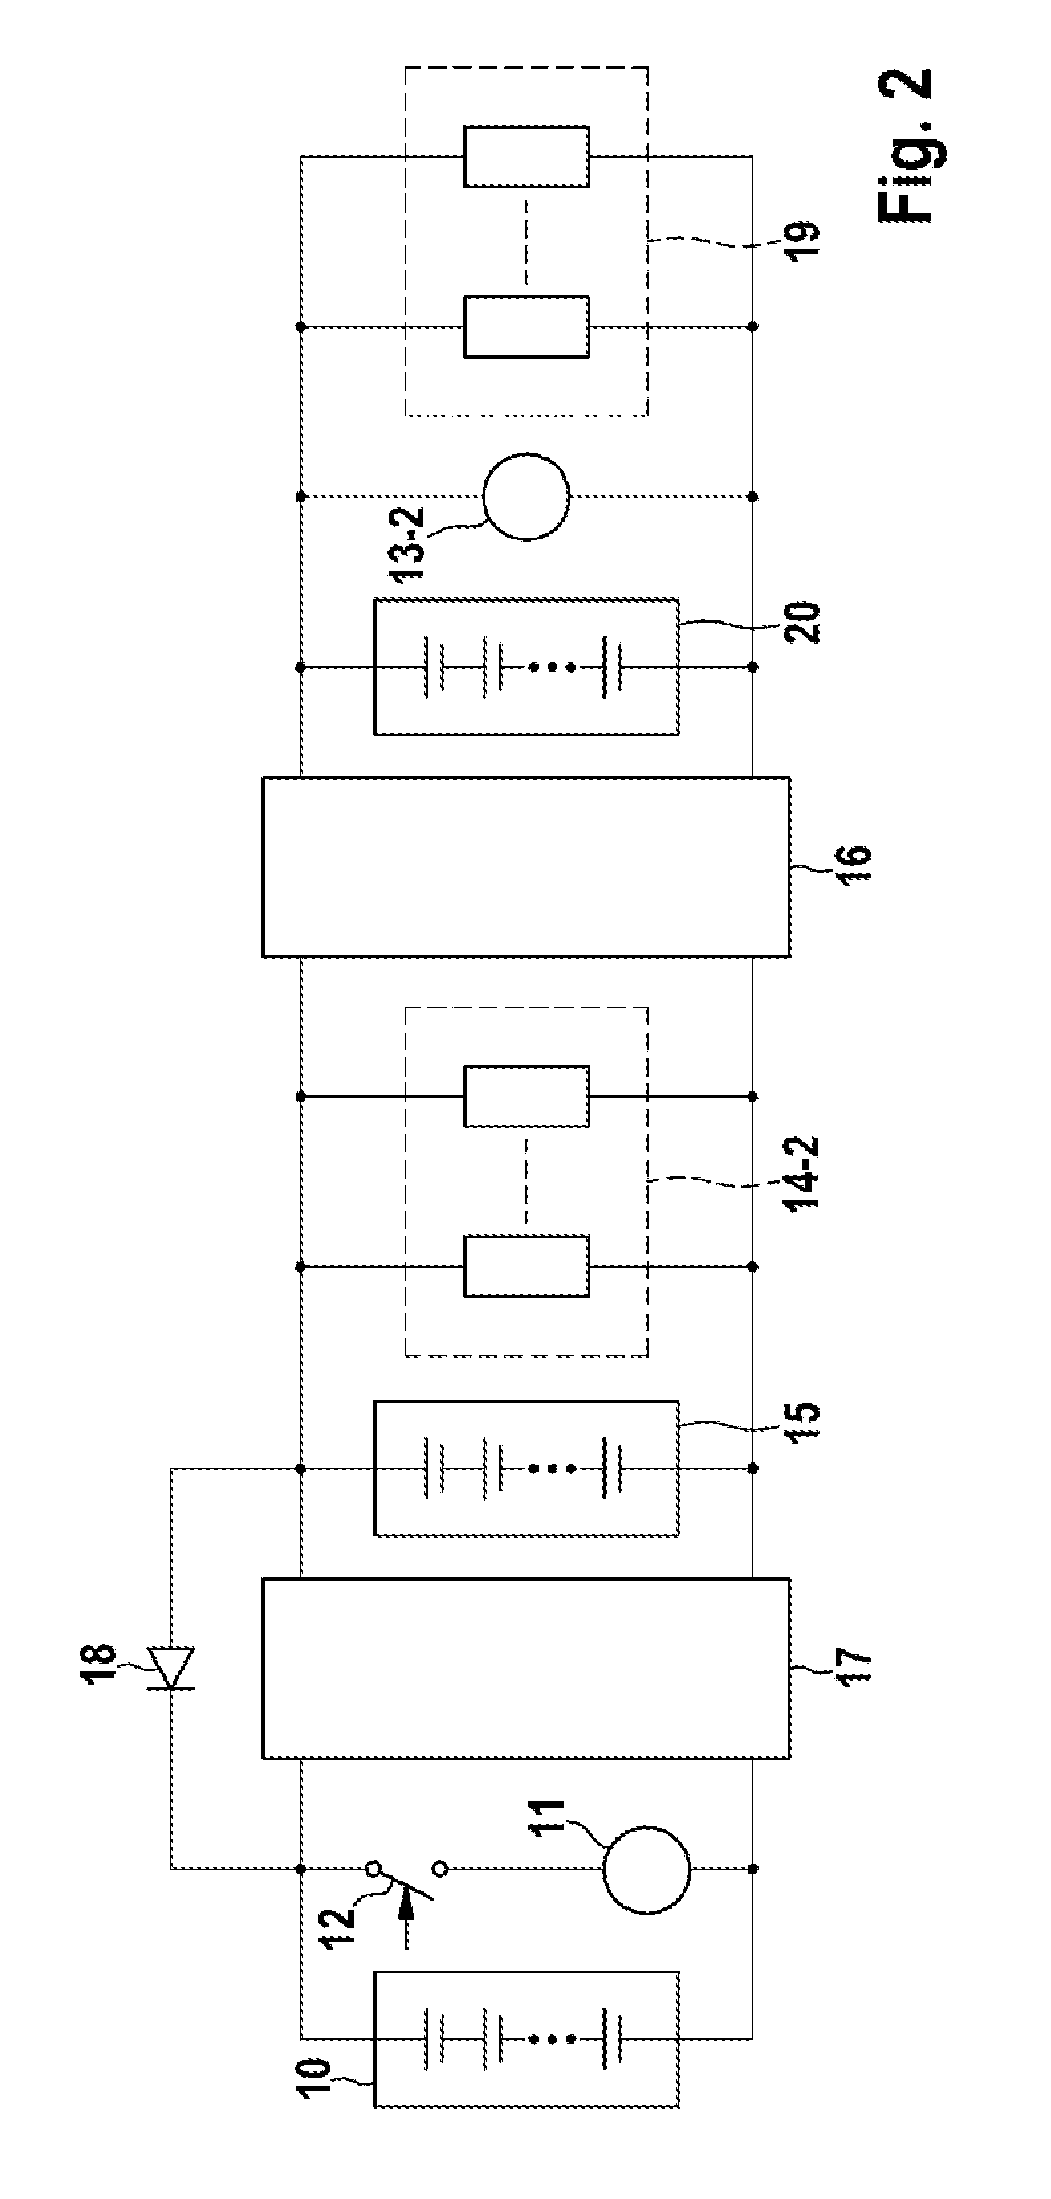 Battery system for micro-hybrid vehicles comprising high-efficiency consumers